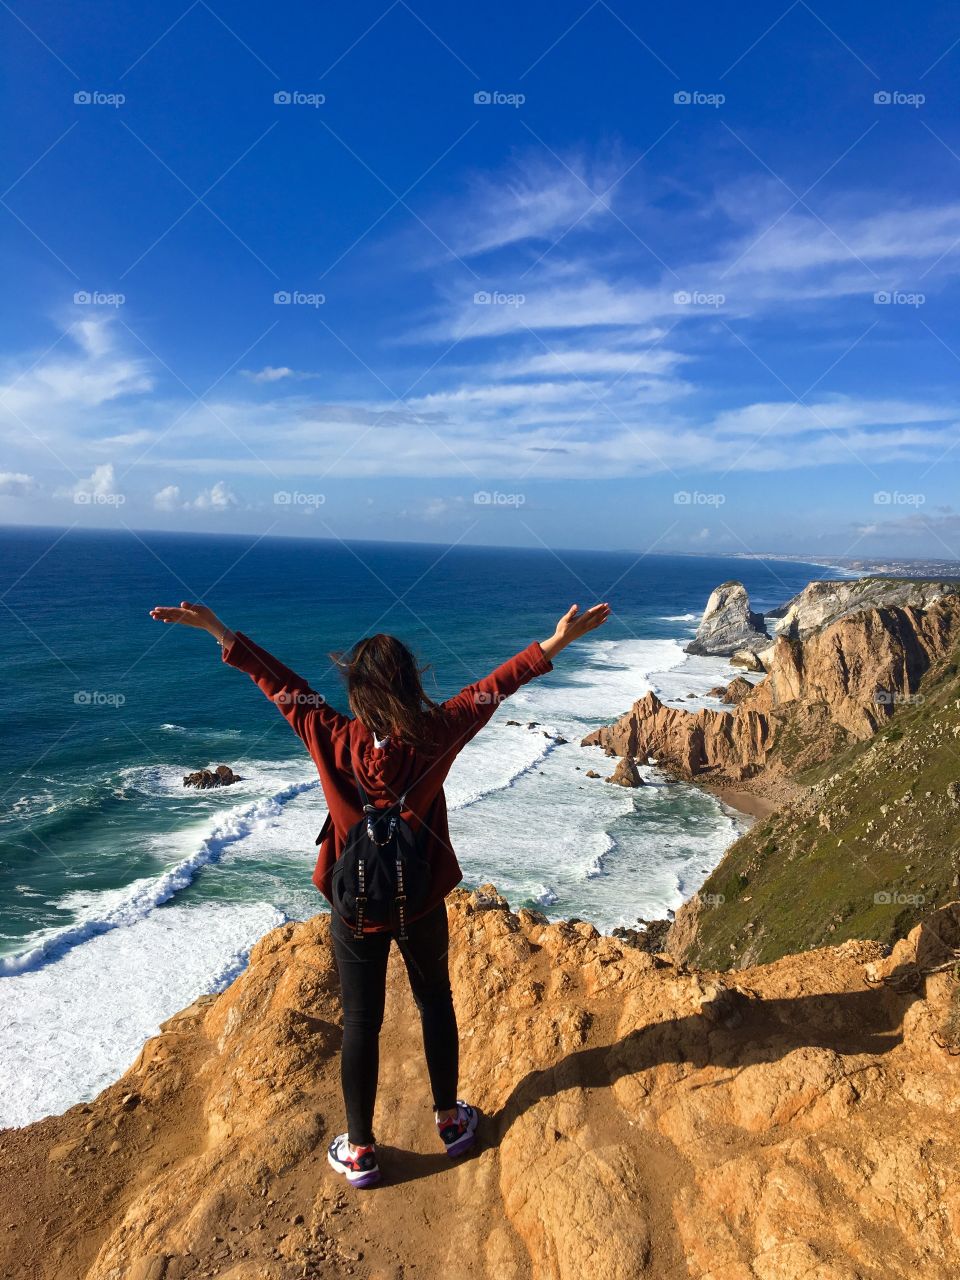 Cabo da Roca - western most point of Europe